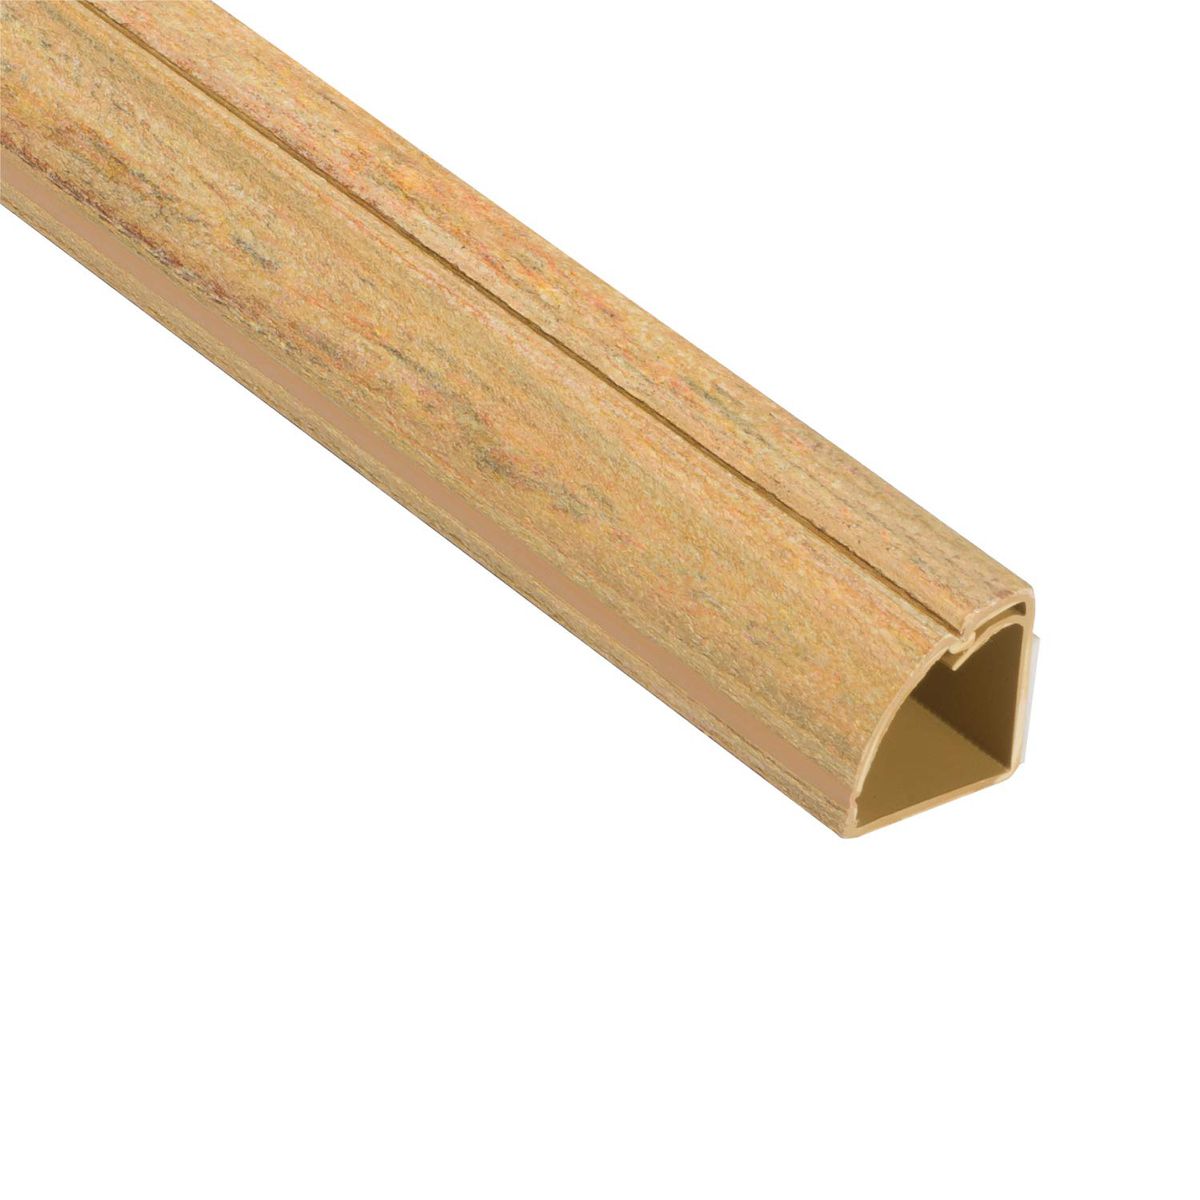 D-Line: ¼ Round Cable Management Trunking 22mm x 22mm x 2m Oak Finnish